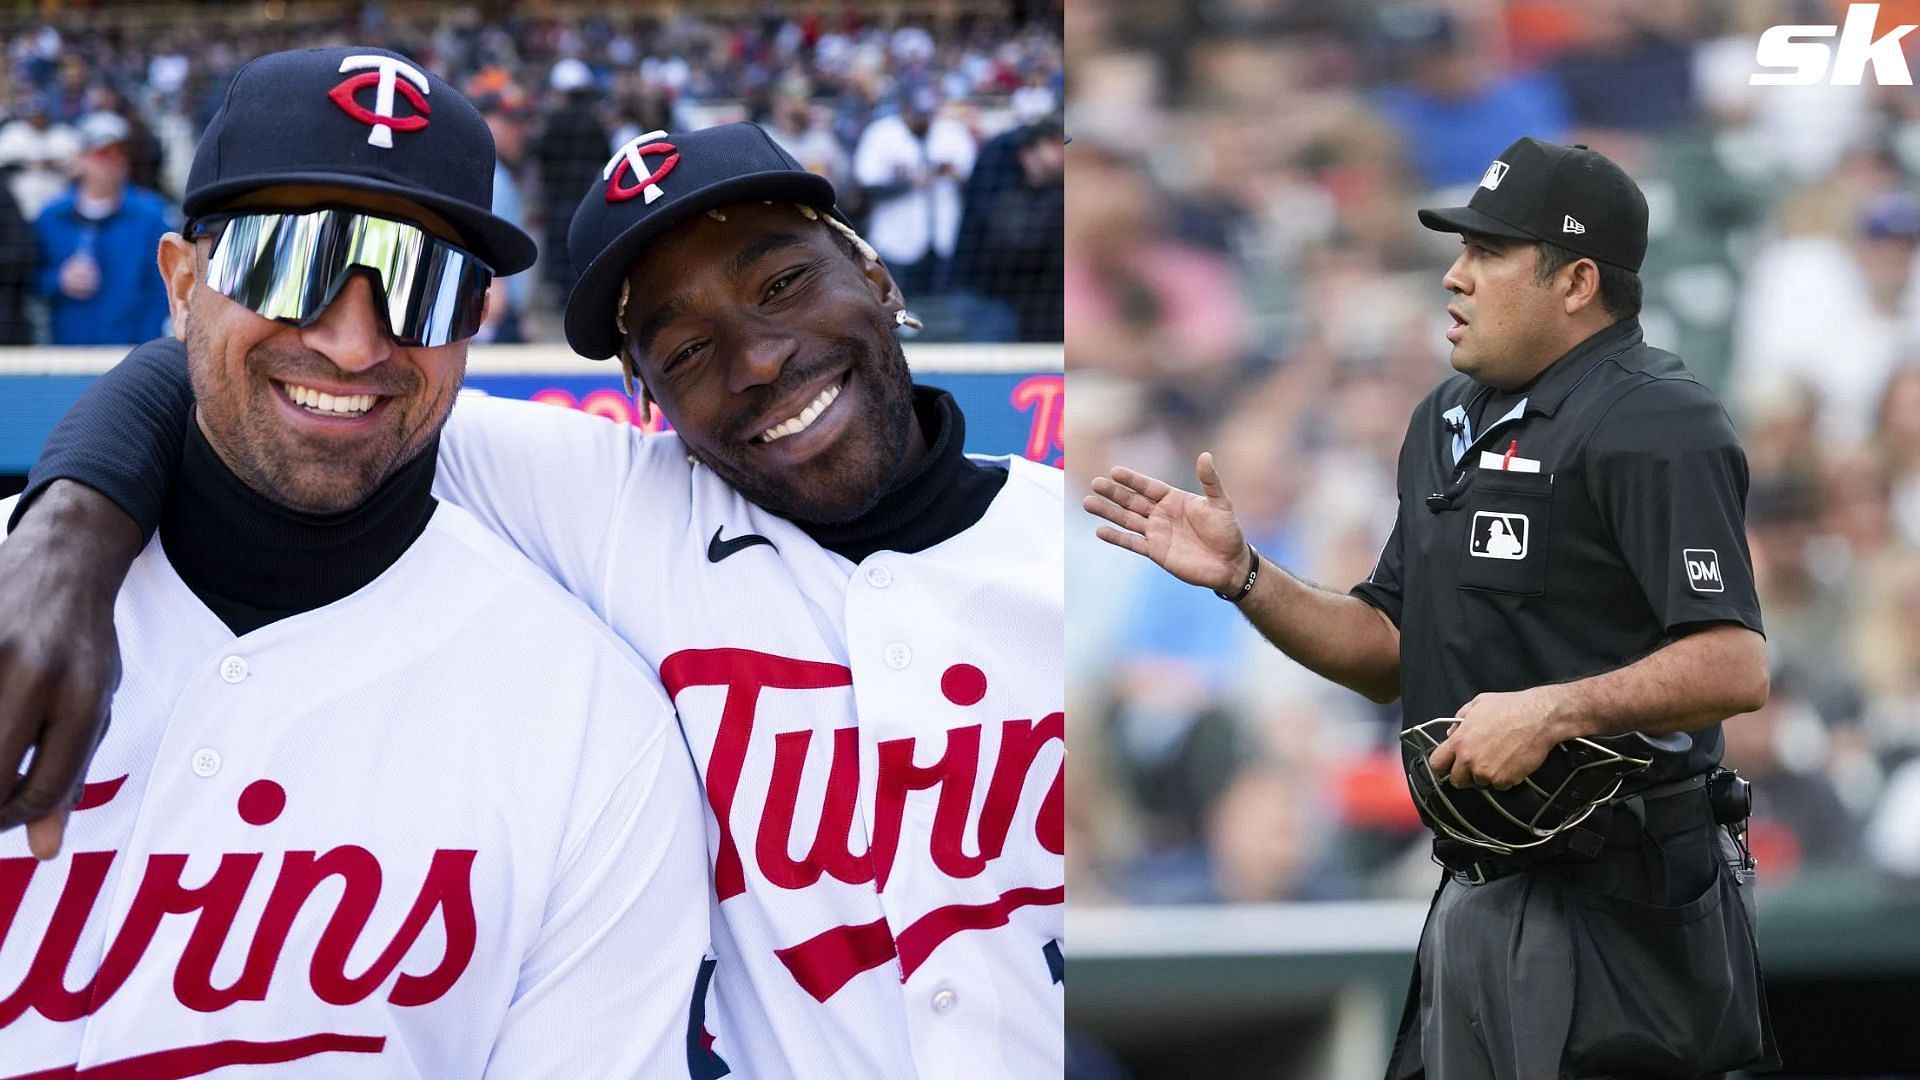 The Twins are in a hitting rut, but should they fire the hitting coach?